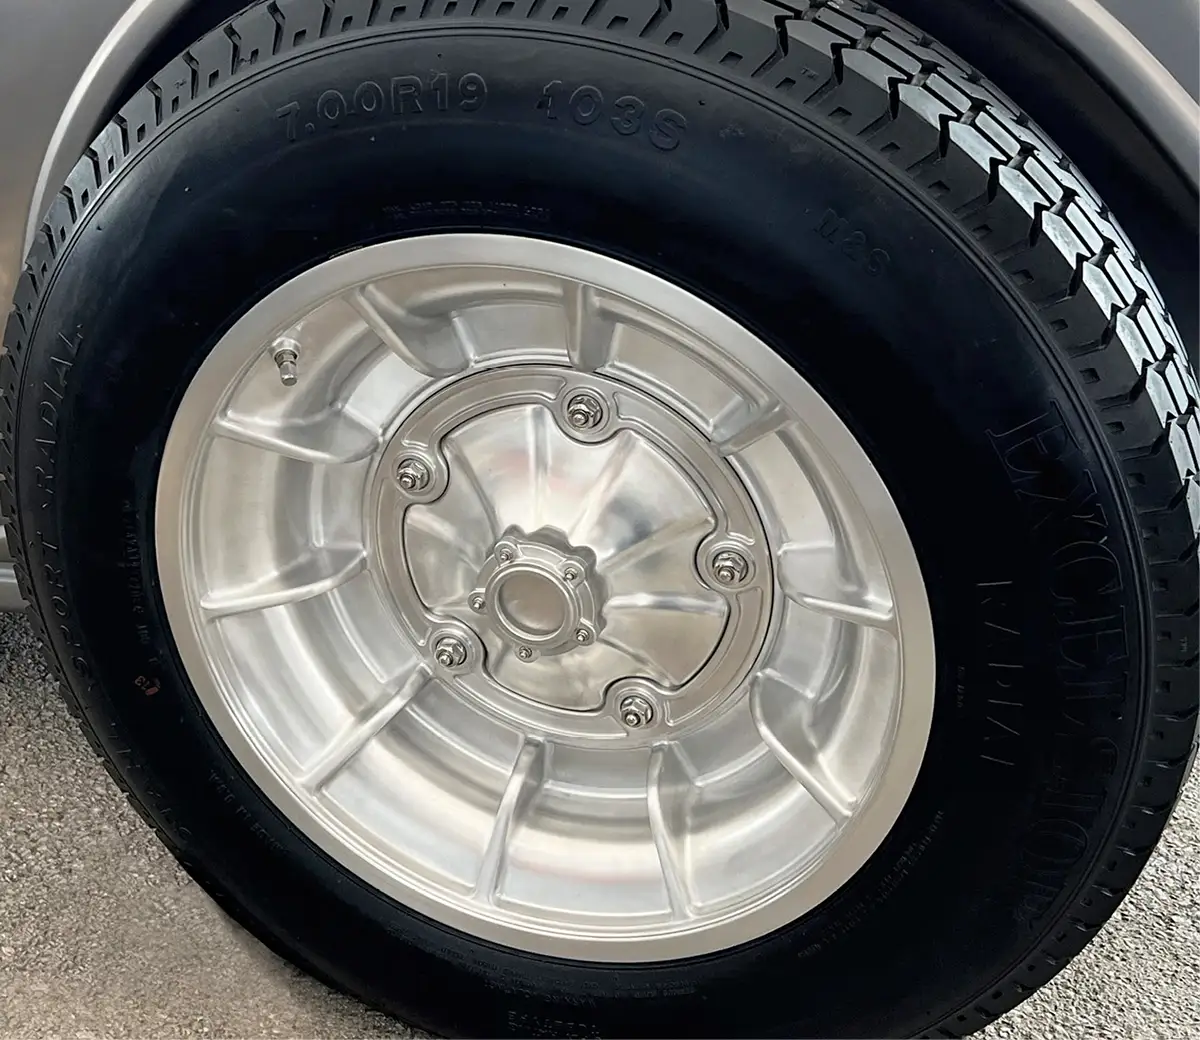 The wheels pay tribute to the wide-five pattern used on the original Ford wheels from 1936.